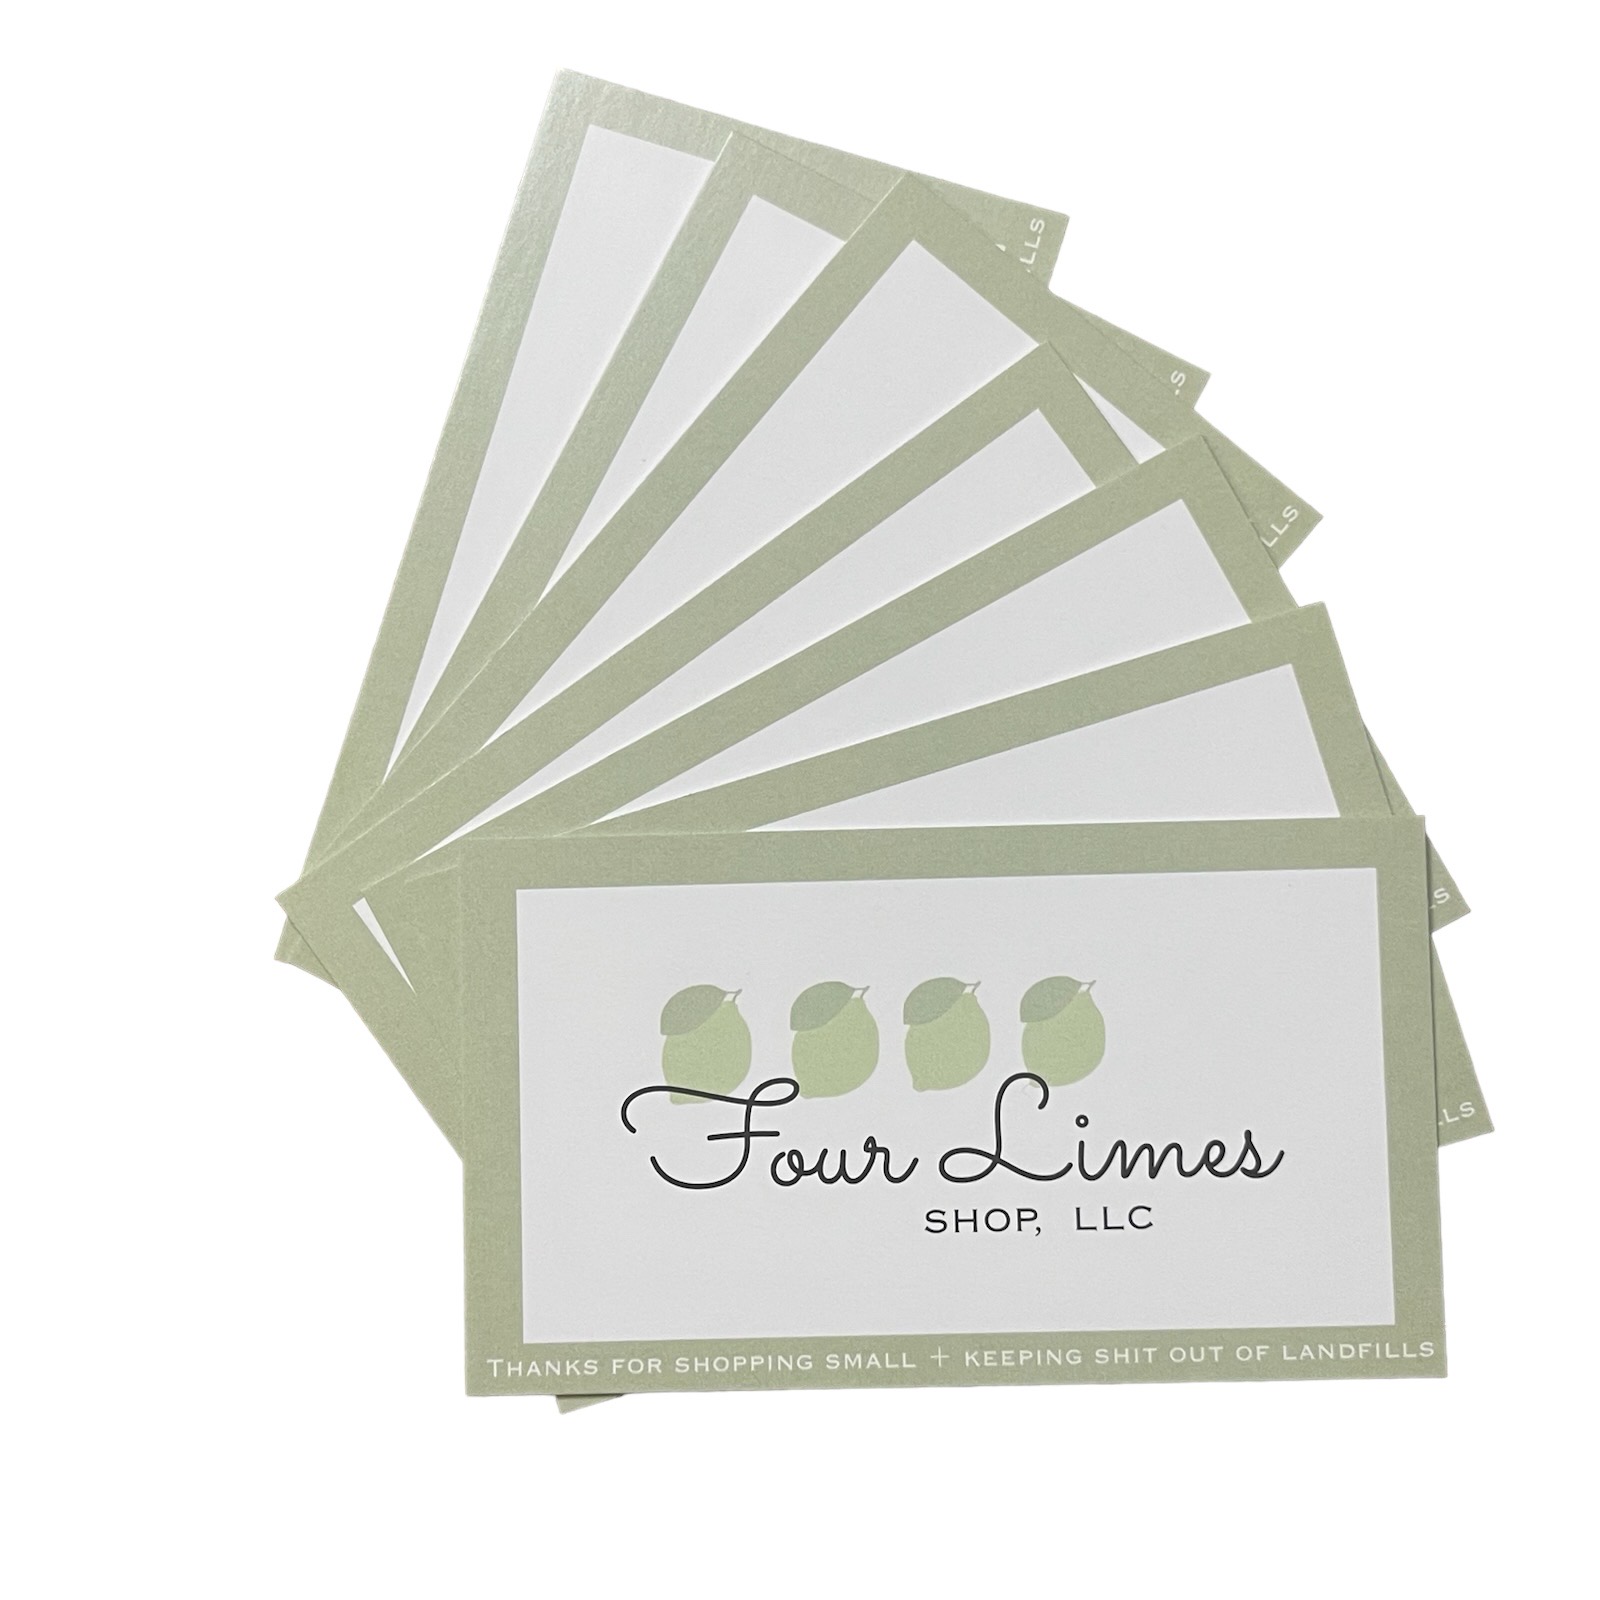 Four limes reseller business cards